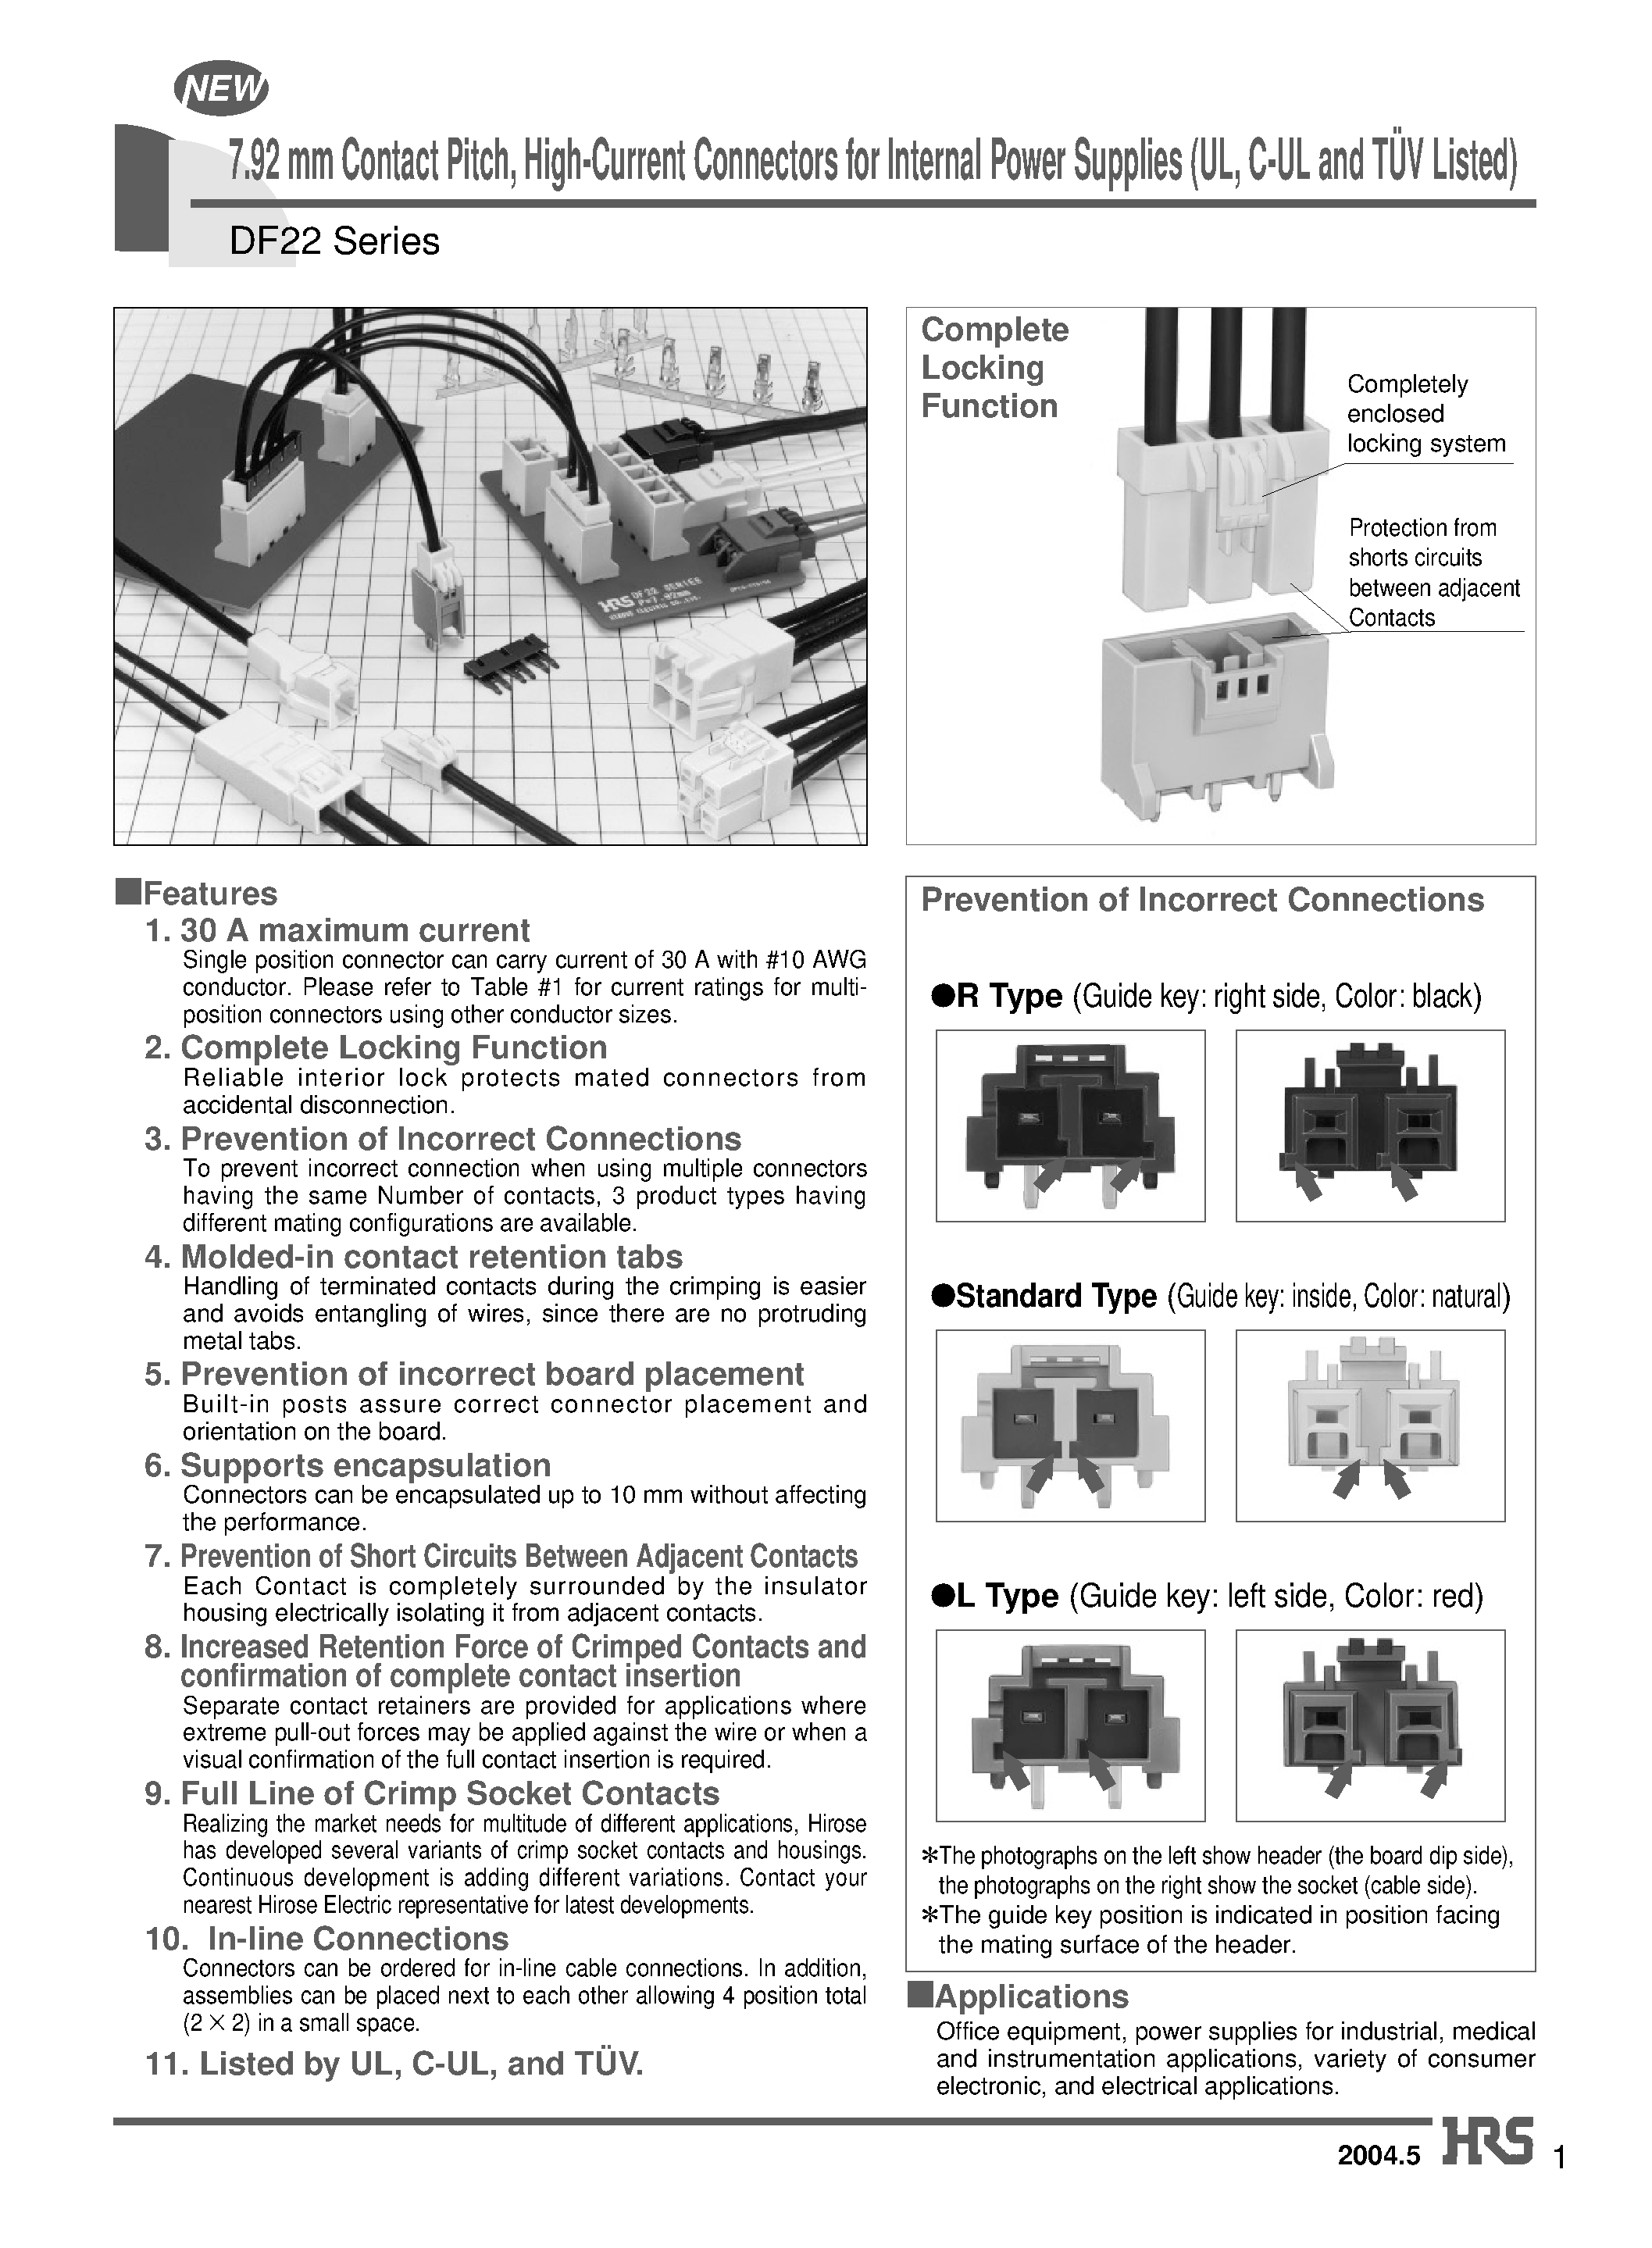 Даташит DF22A-4S-7.92C - 7.92 mm Contact Pitch/ High-Current Connectors for Internal Power Supplies (UL/ C-UL and TUV Listed) страница 1